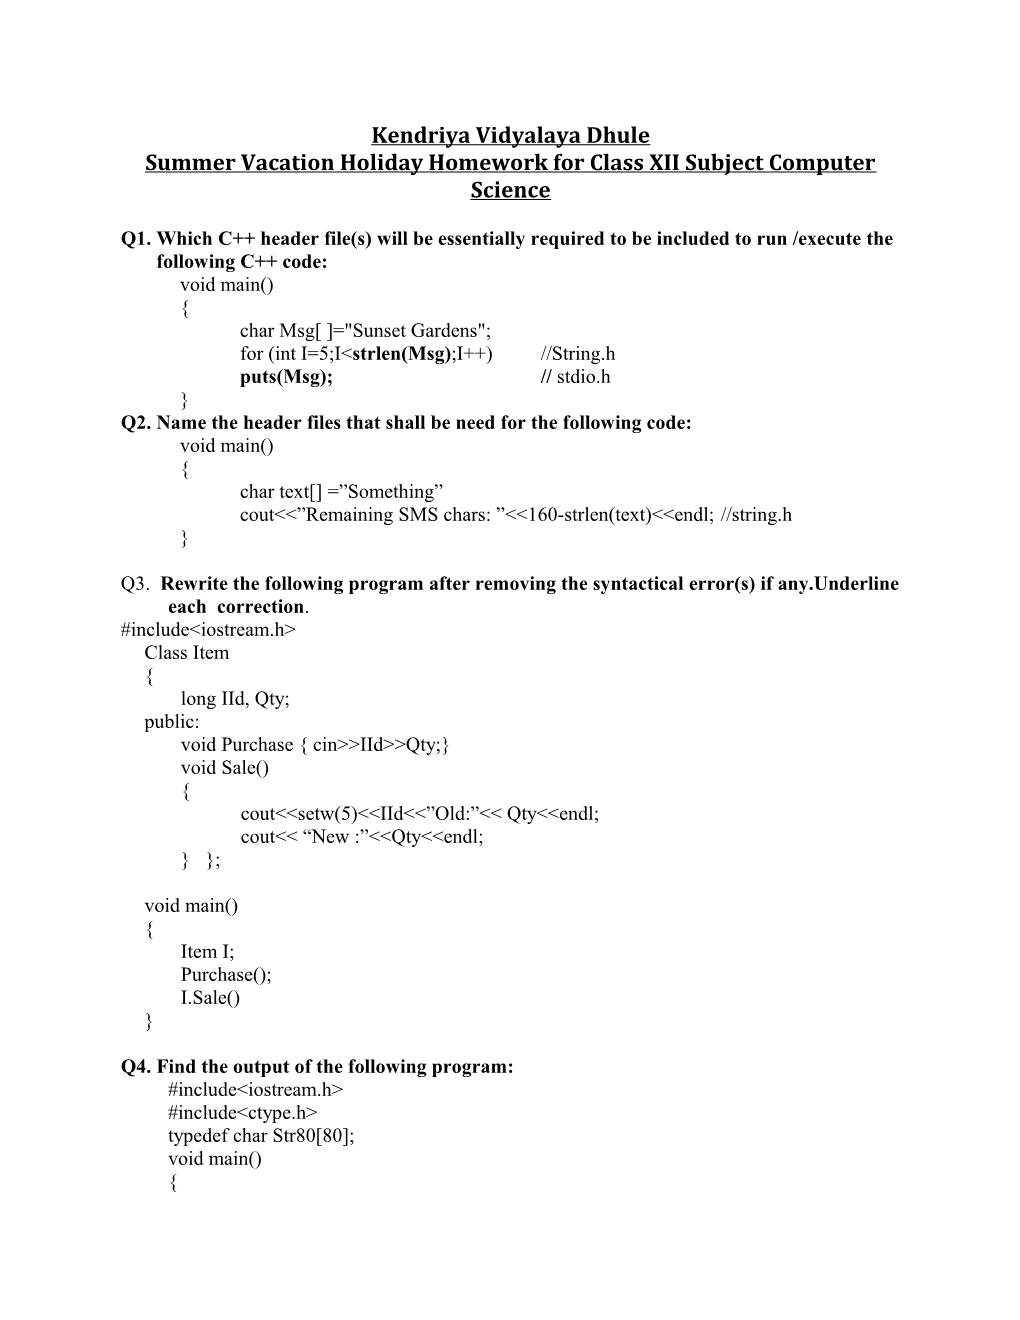 Summer Vacation Holiday Homework for Class XII Subject Computer Science